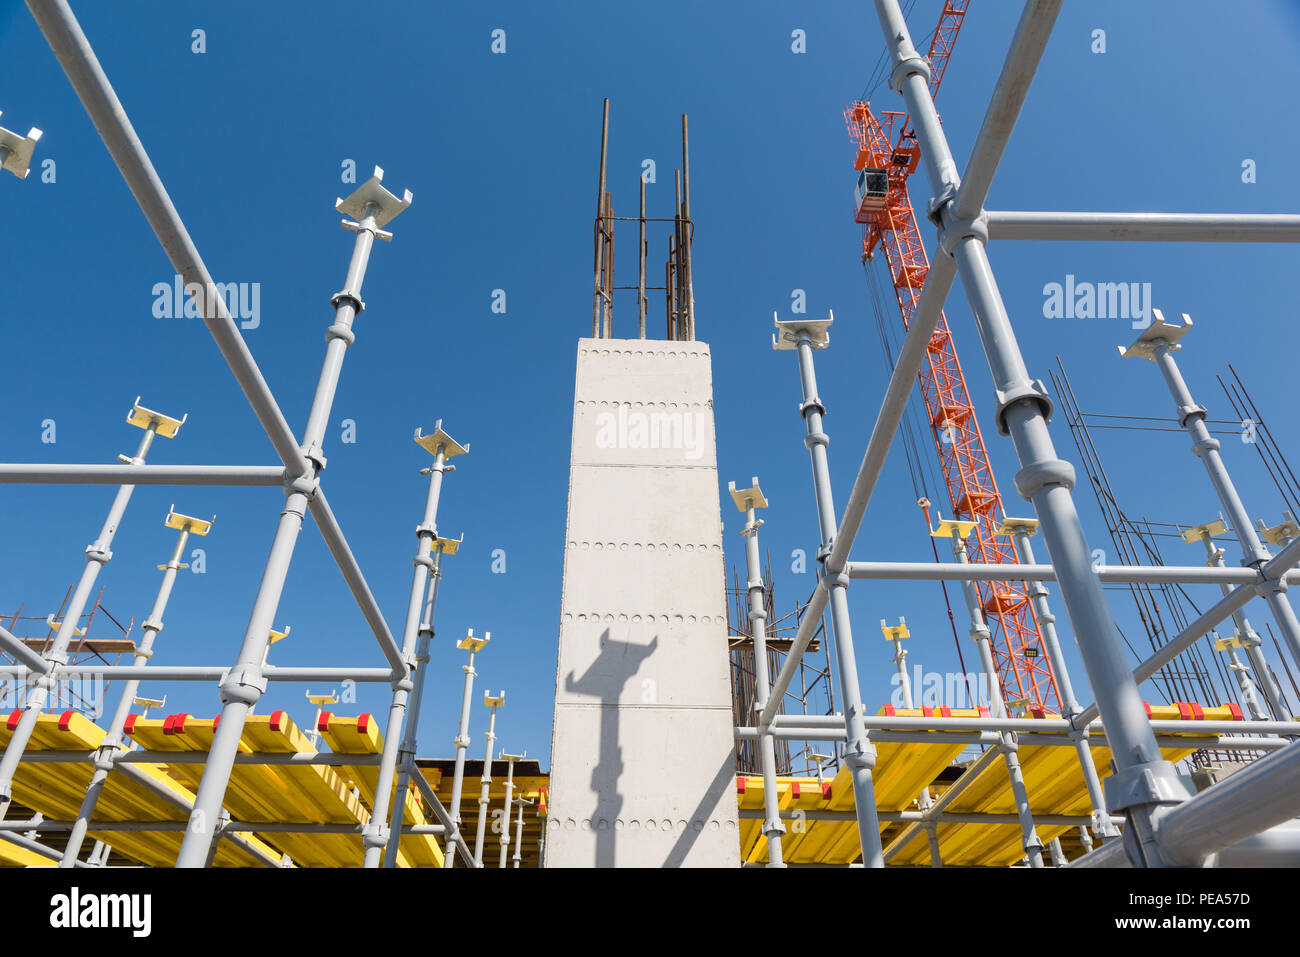 metal concrete structures of the building under construction. scaffolding and supports on a crane background. bottom view Stock Photo